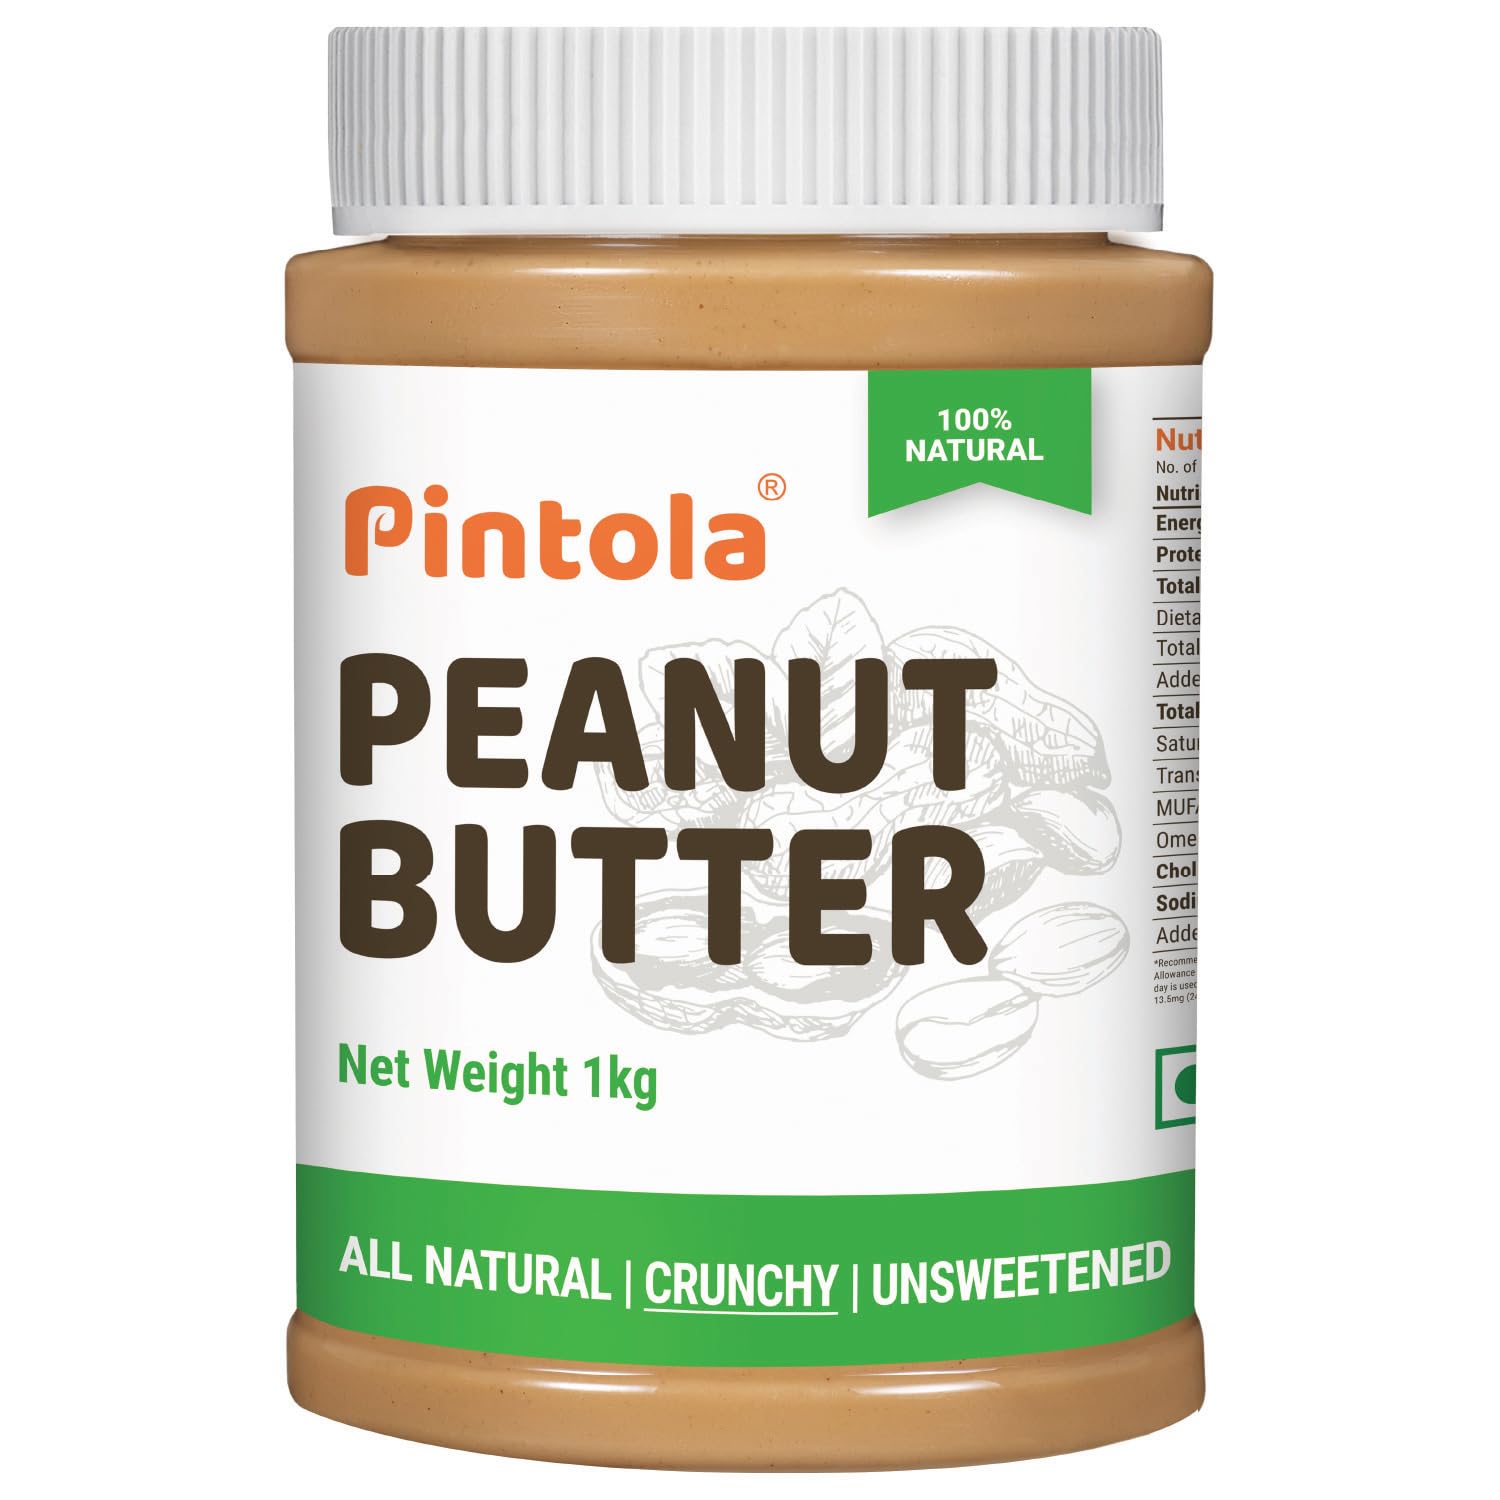 Pintola All Natural Peanut Butter Crunchy 1kg | Unsweetened | 30g Protein | Vegan Peanut Butter